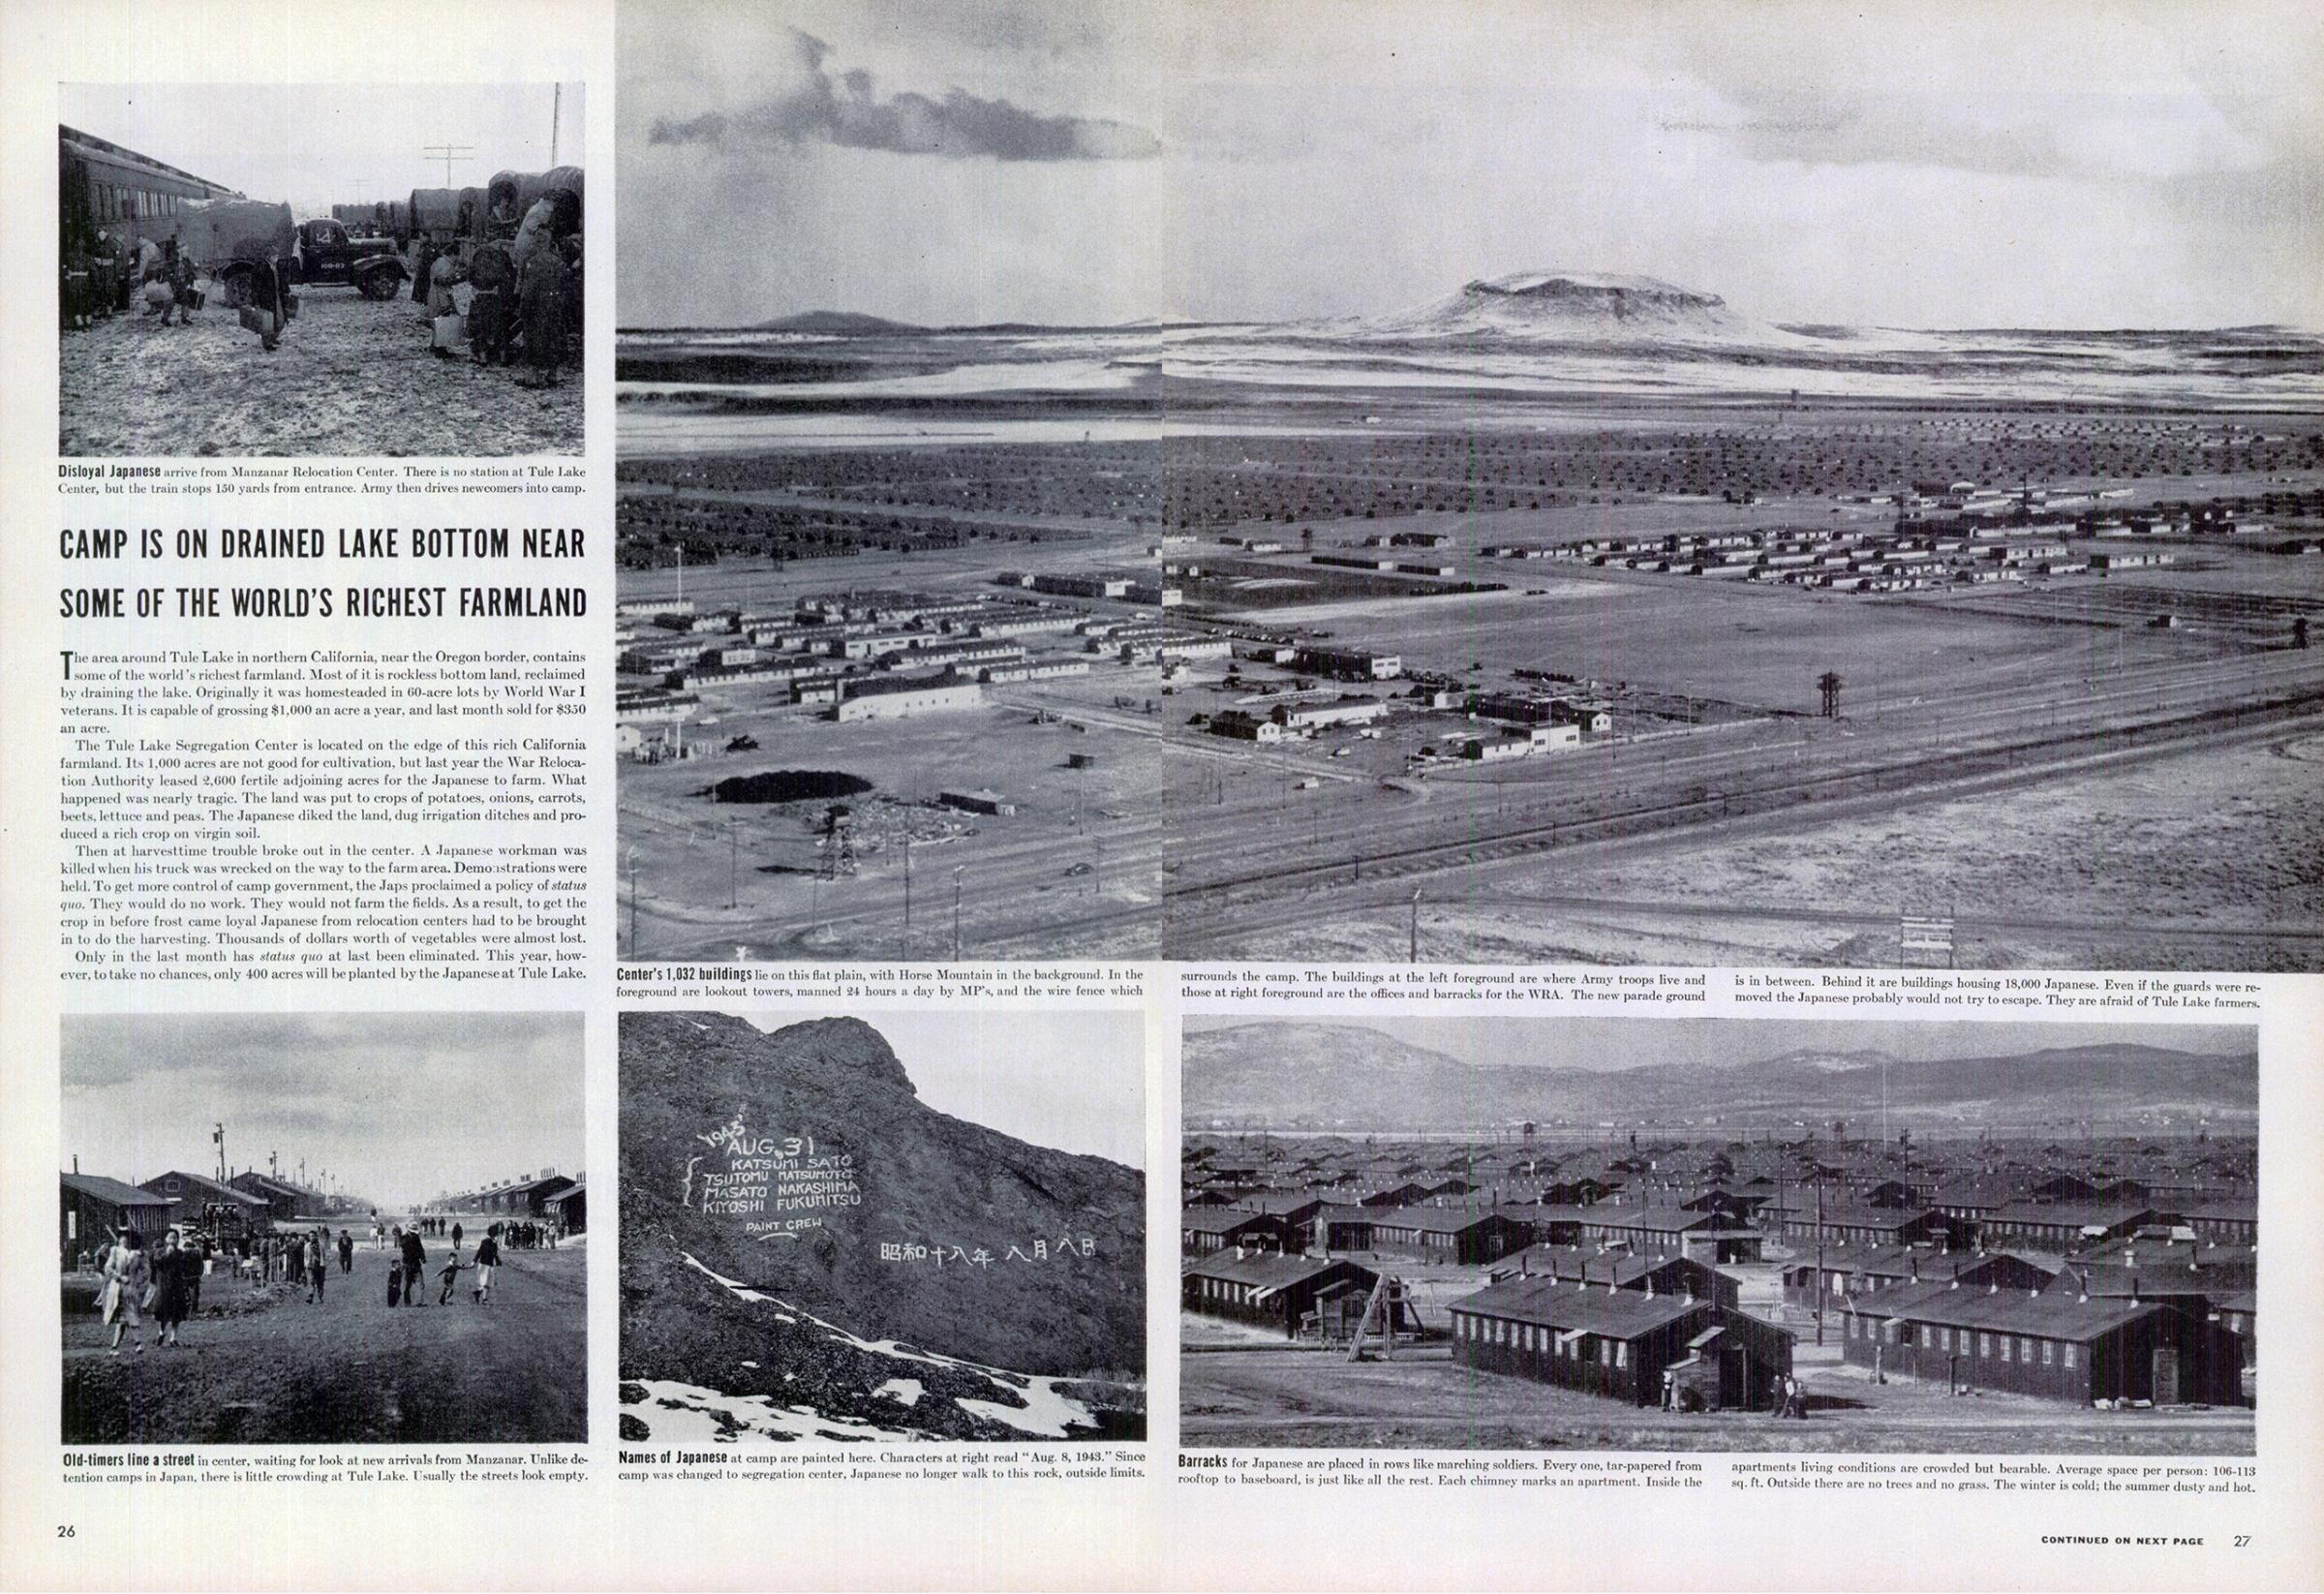 Tule Lake Photo essay by Carl Mydans from the Mar. 20, 1944 issue of LIFE magazine.